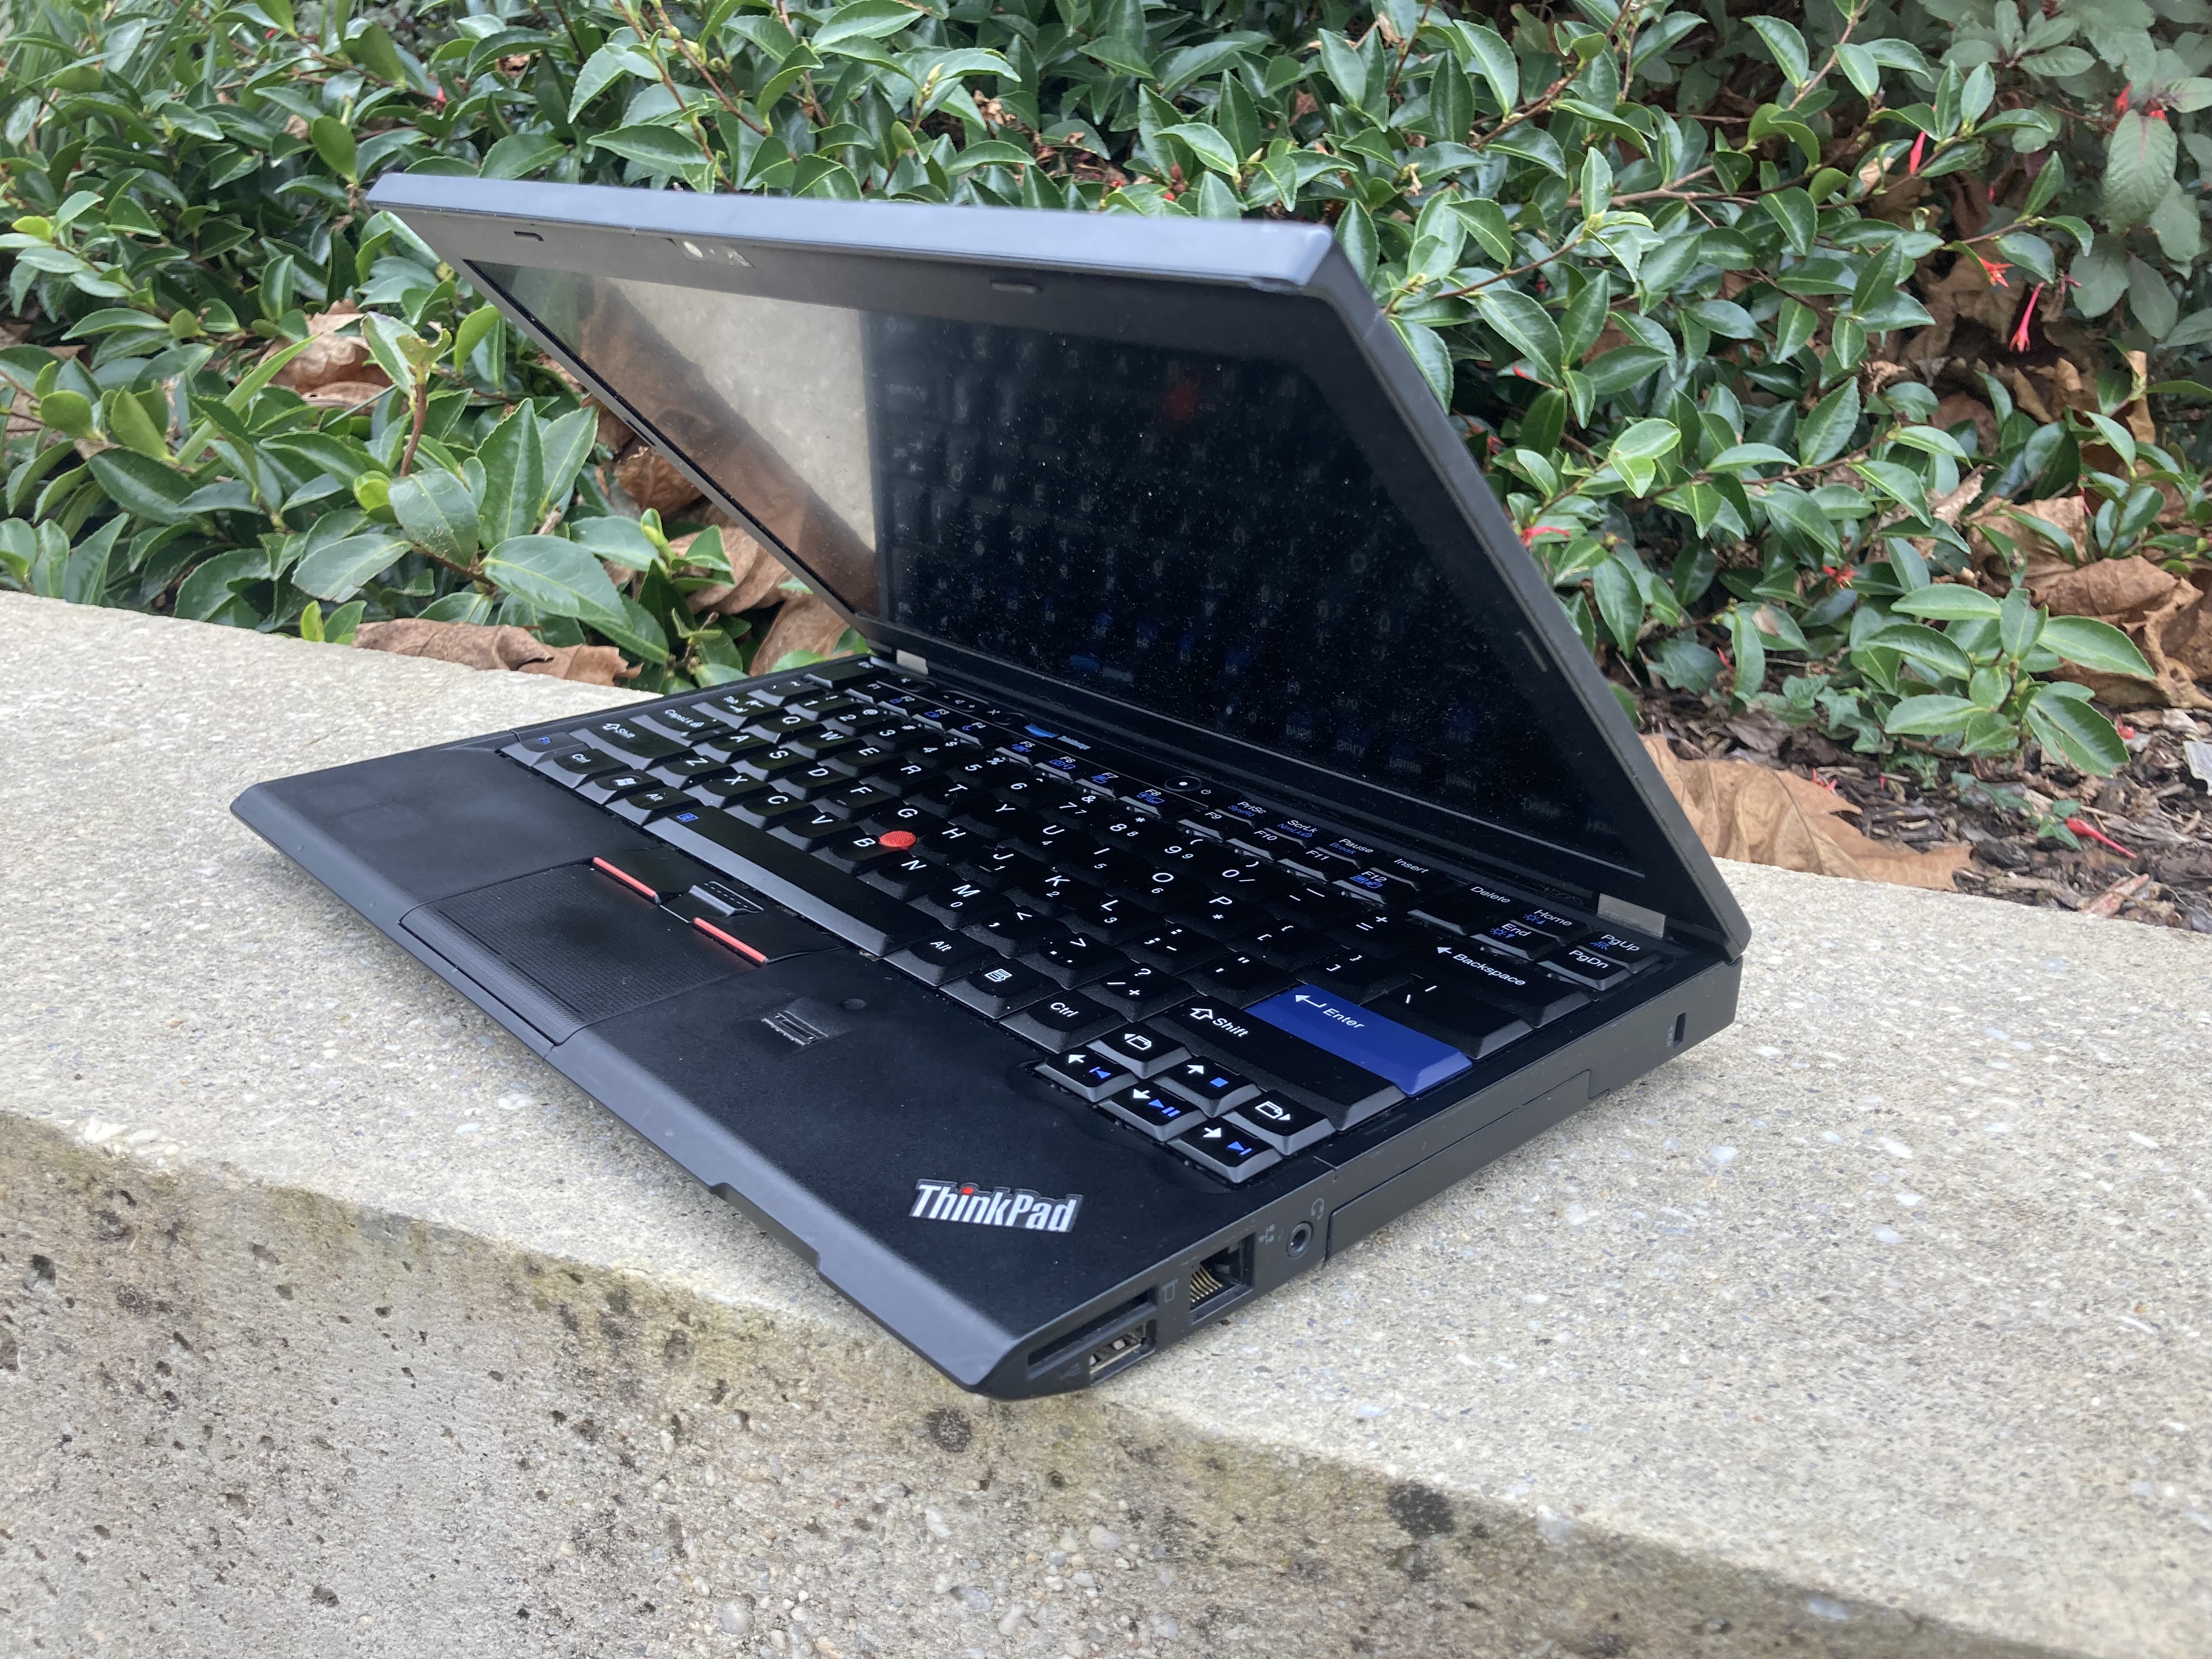 The thinkpad x220 with the lid
open, showing the screen and keyboard